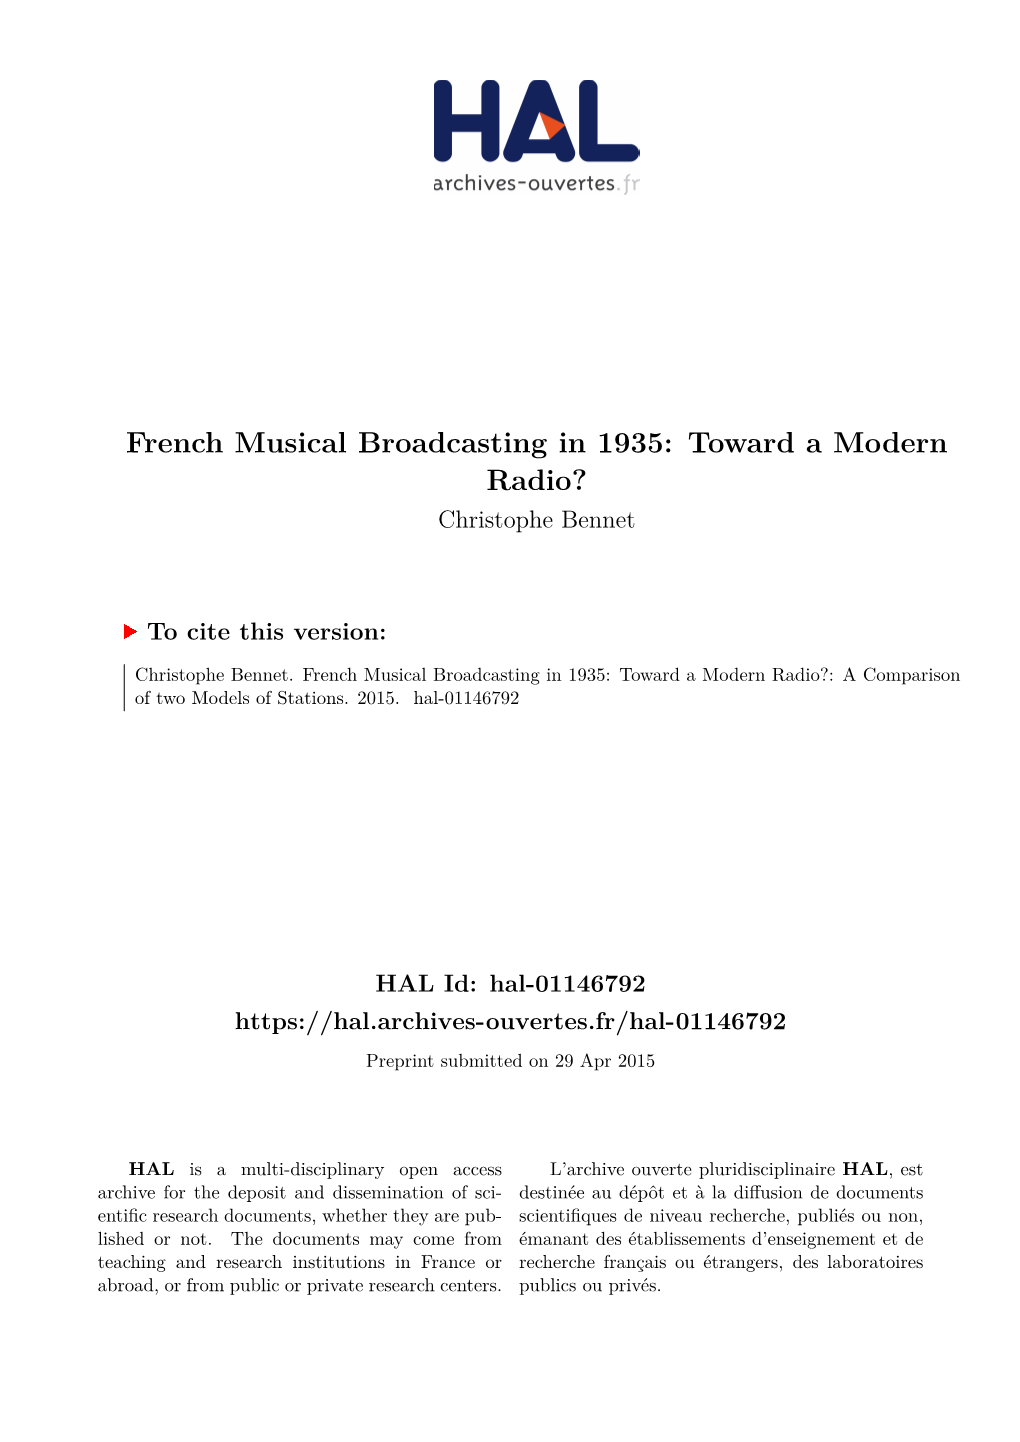 French Musical Broadcasting in 1935: Toward a Modern Radio? Christophe Bennet